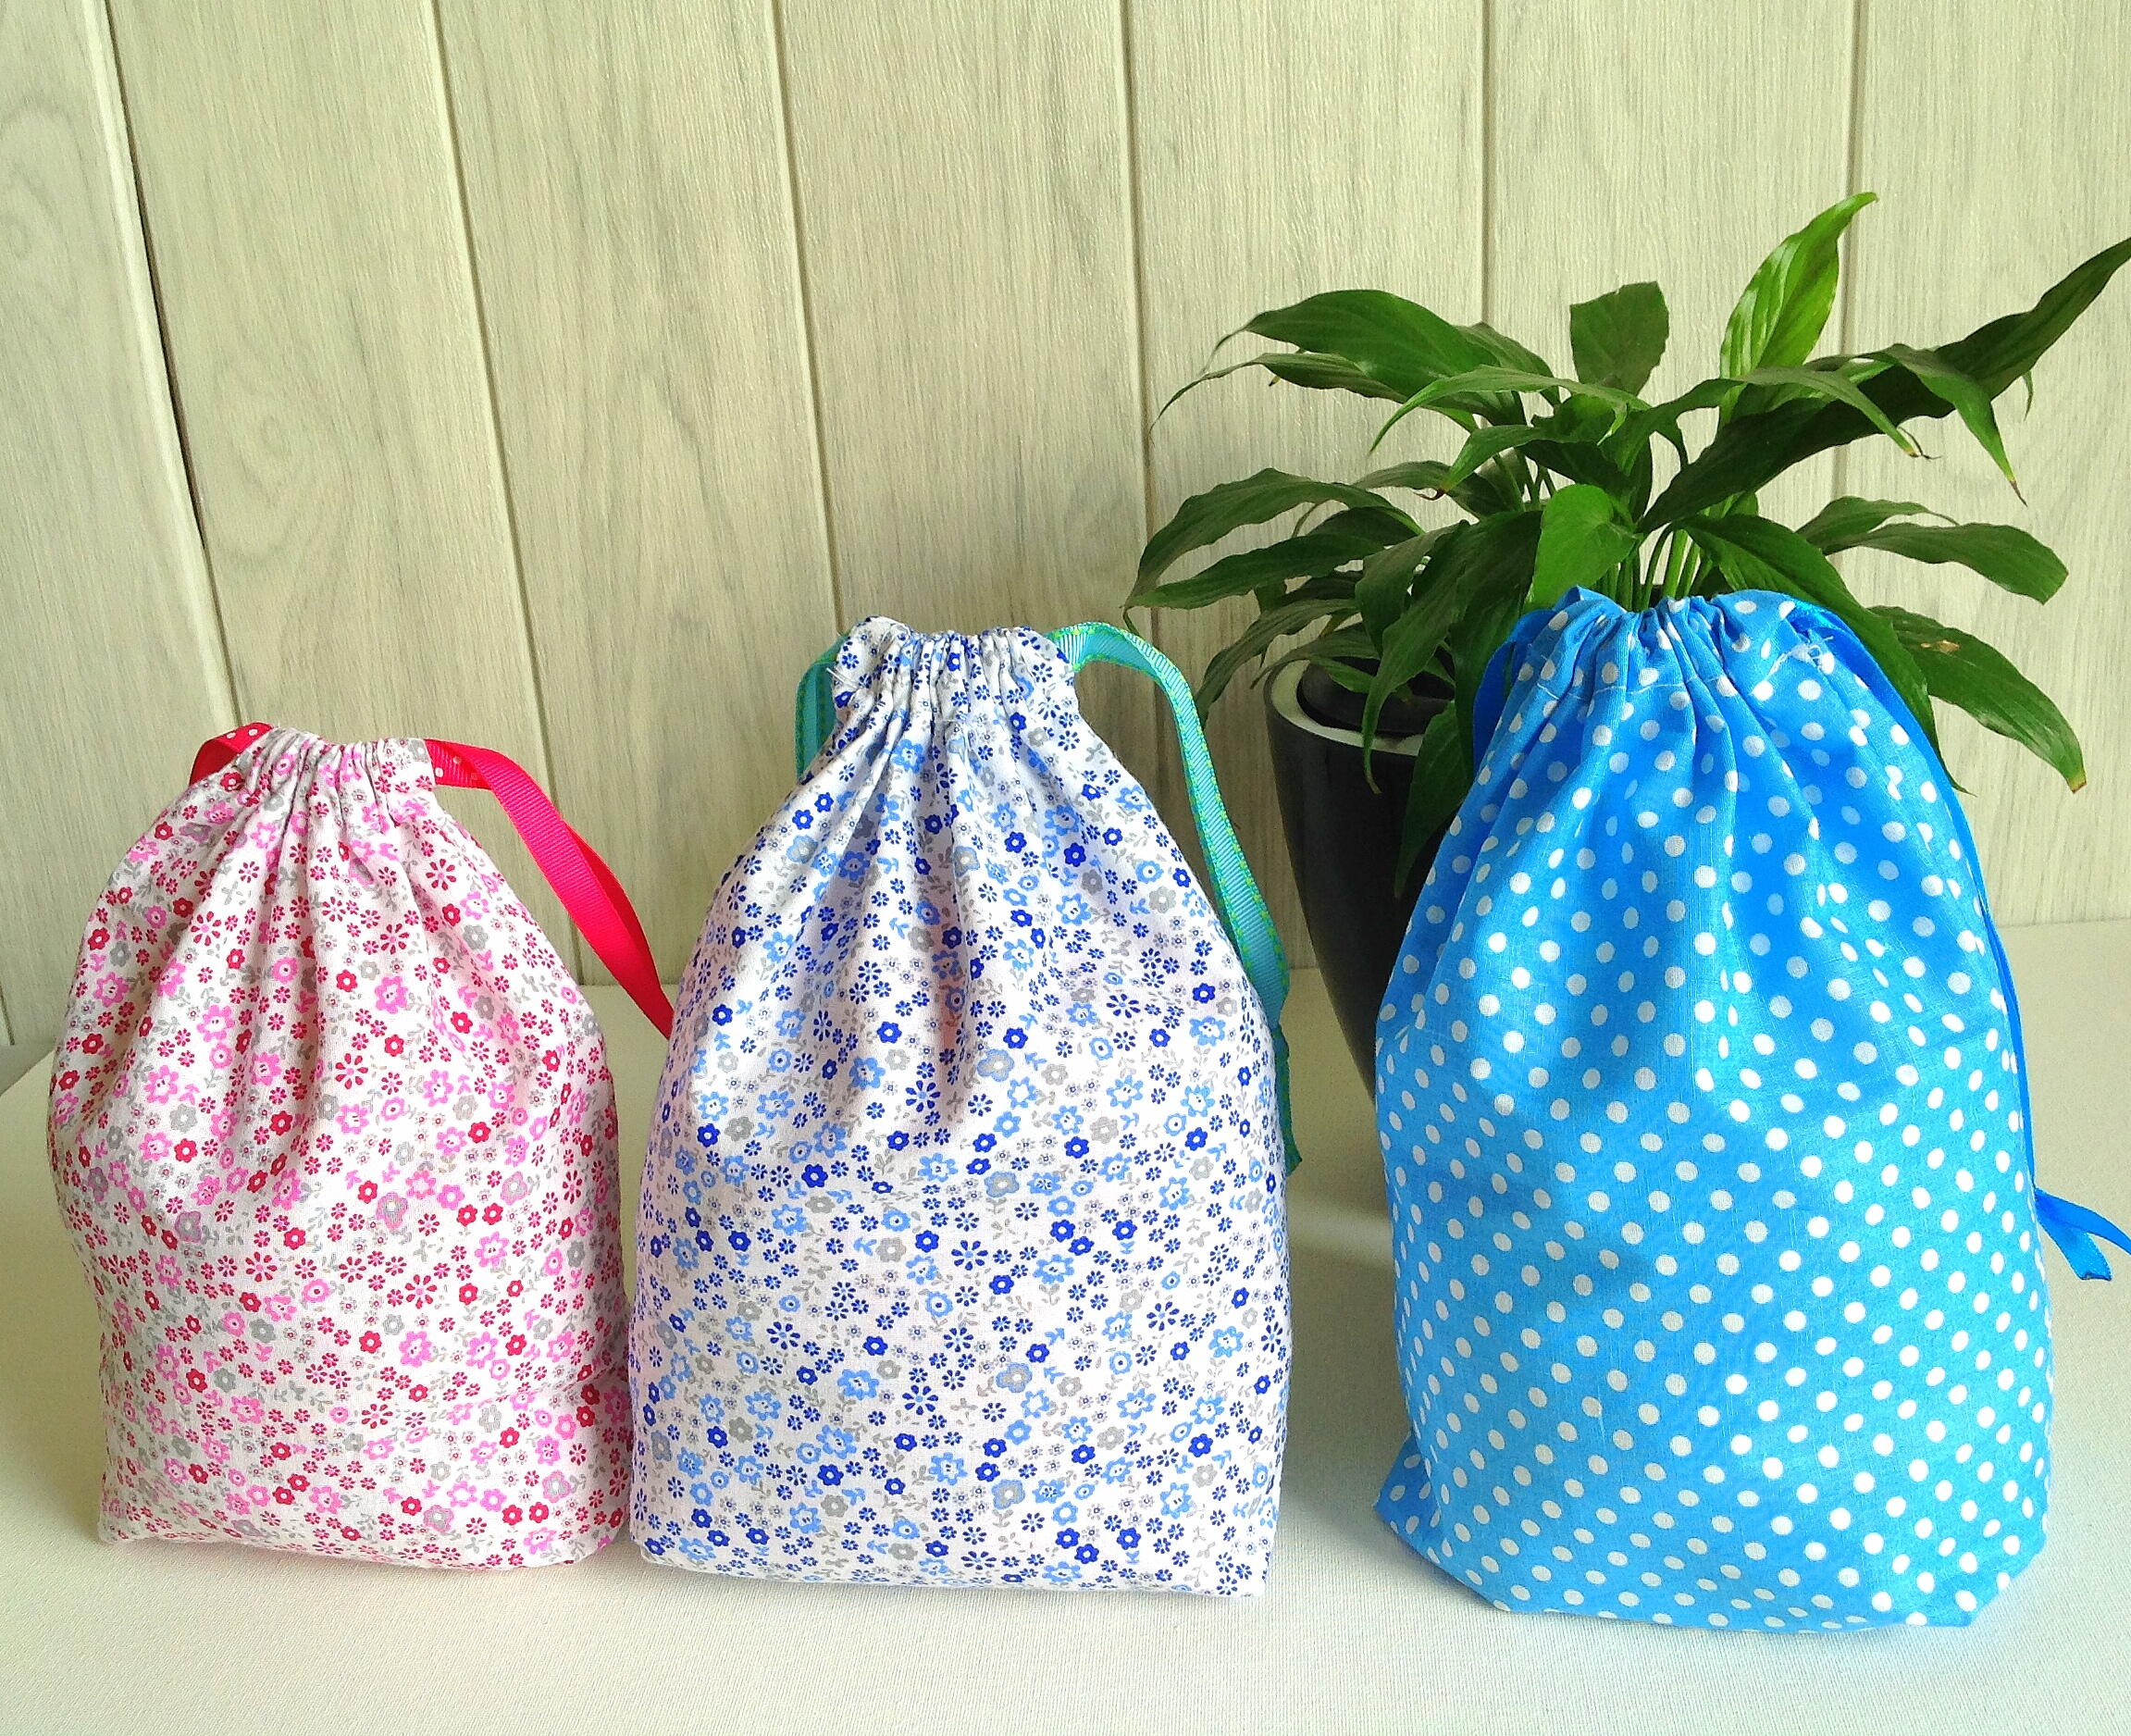 How To Sew A Drawstring Bag | AllFreeSewing.com